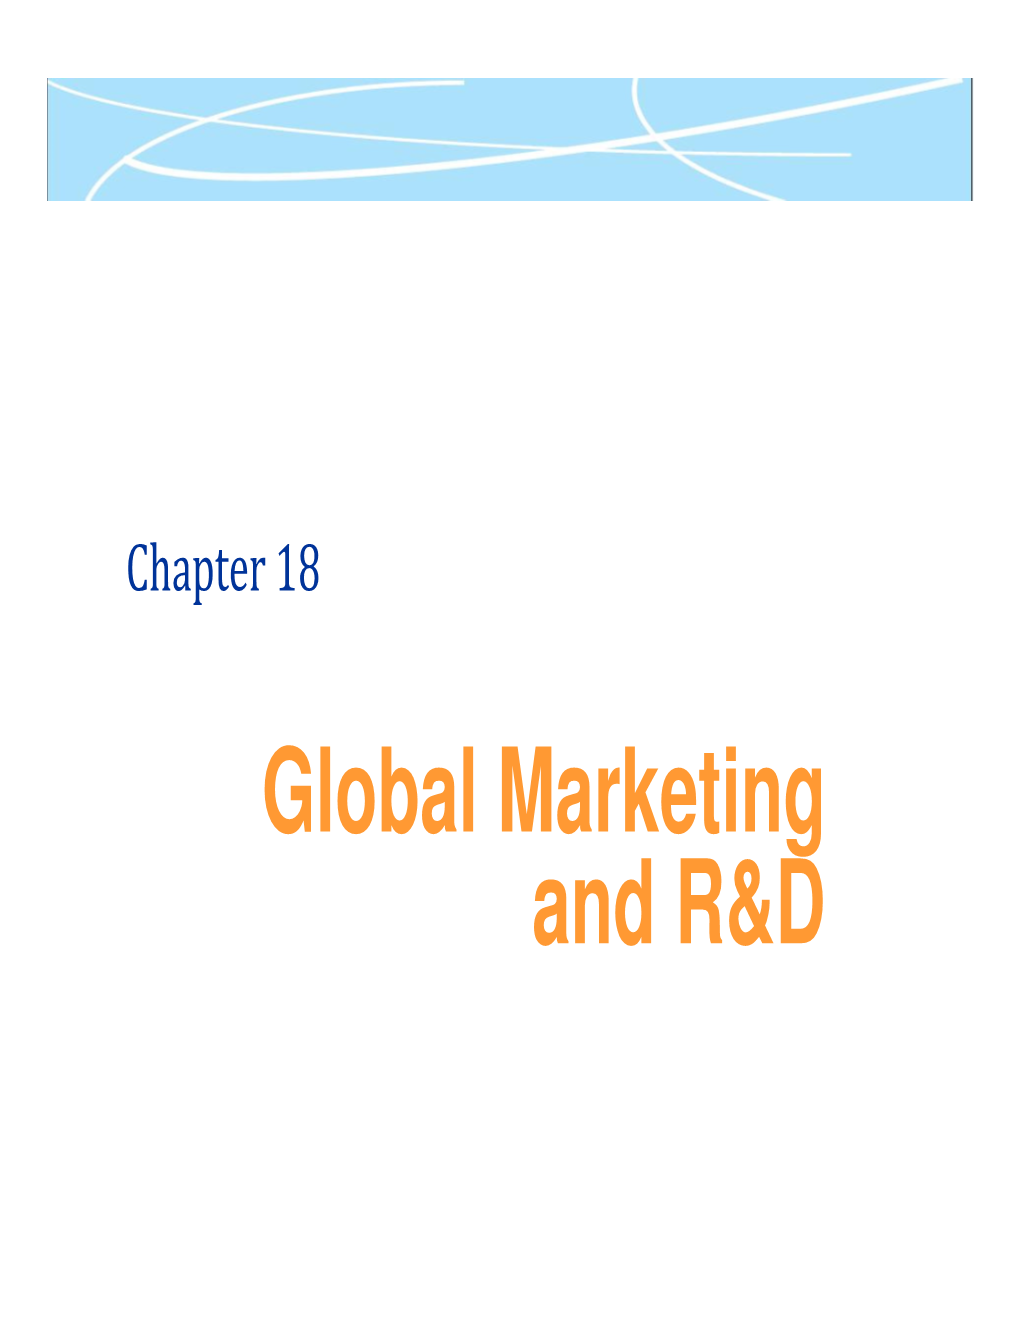 Global Marketing and R&D